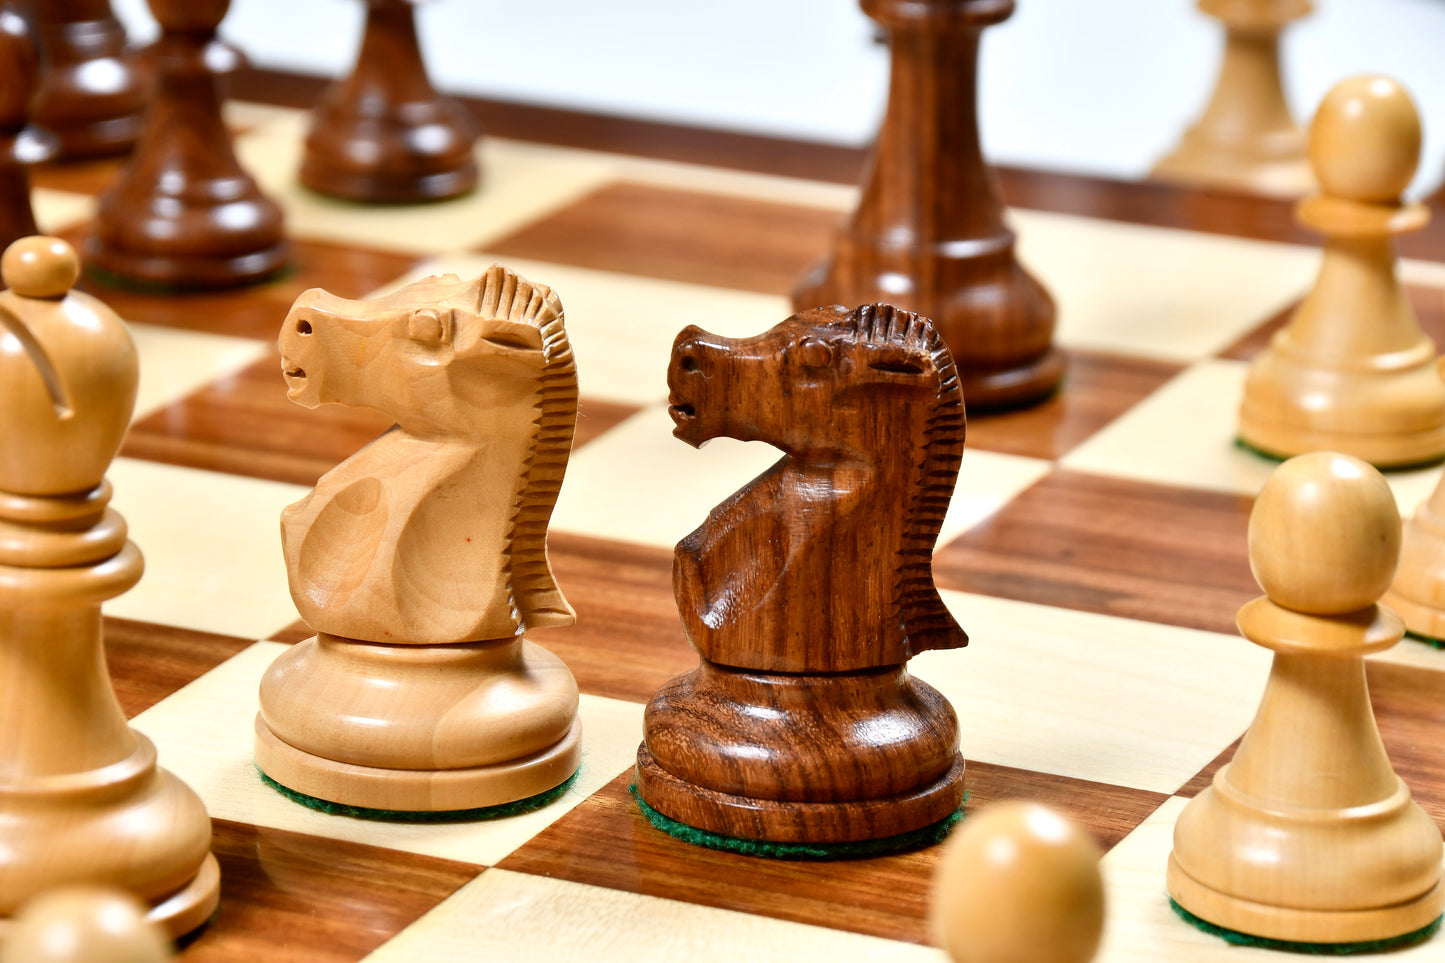 Combo of 1972 Reproduced Fischer-Spassky Staunton Pattern Chess Set V2.0 & Wooden Chess Board in Sheesham Wood & Boxwood - 3.75" King